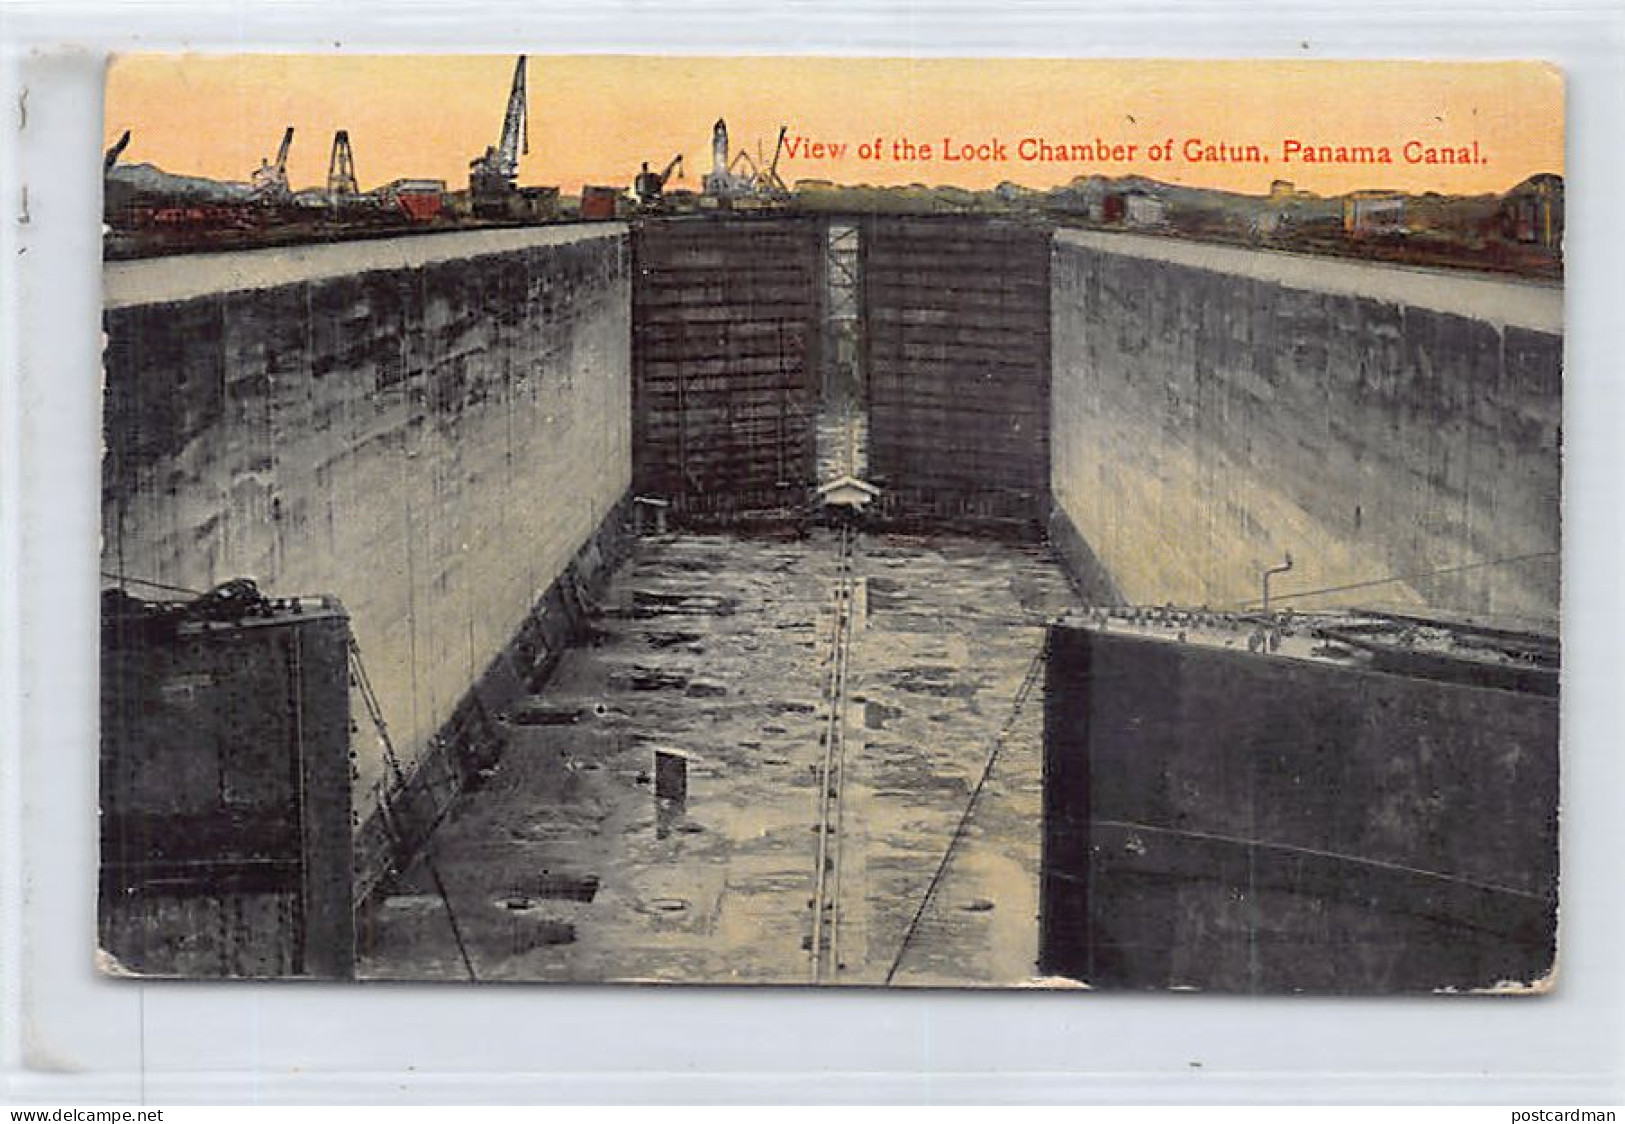 PANAMA CANAL - View Of The Lock Chamber Of Gatun - Publ. The Valentine Souvenir Co.  - Panama